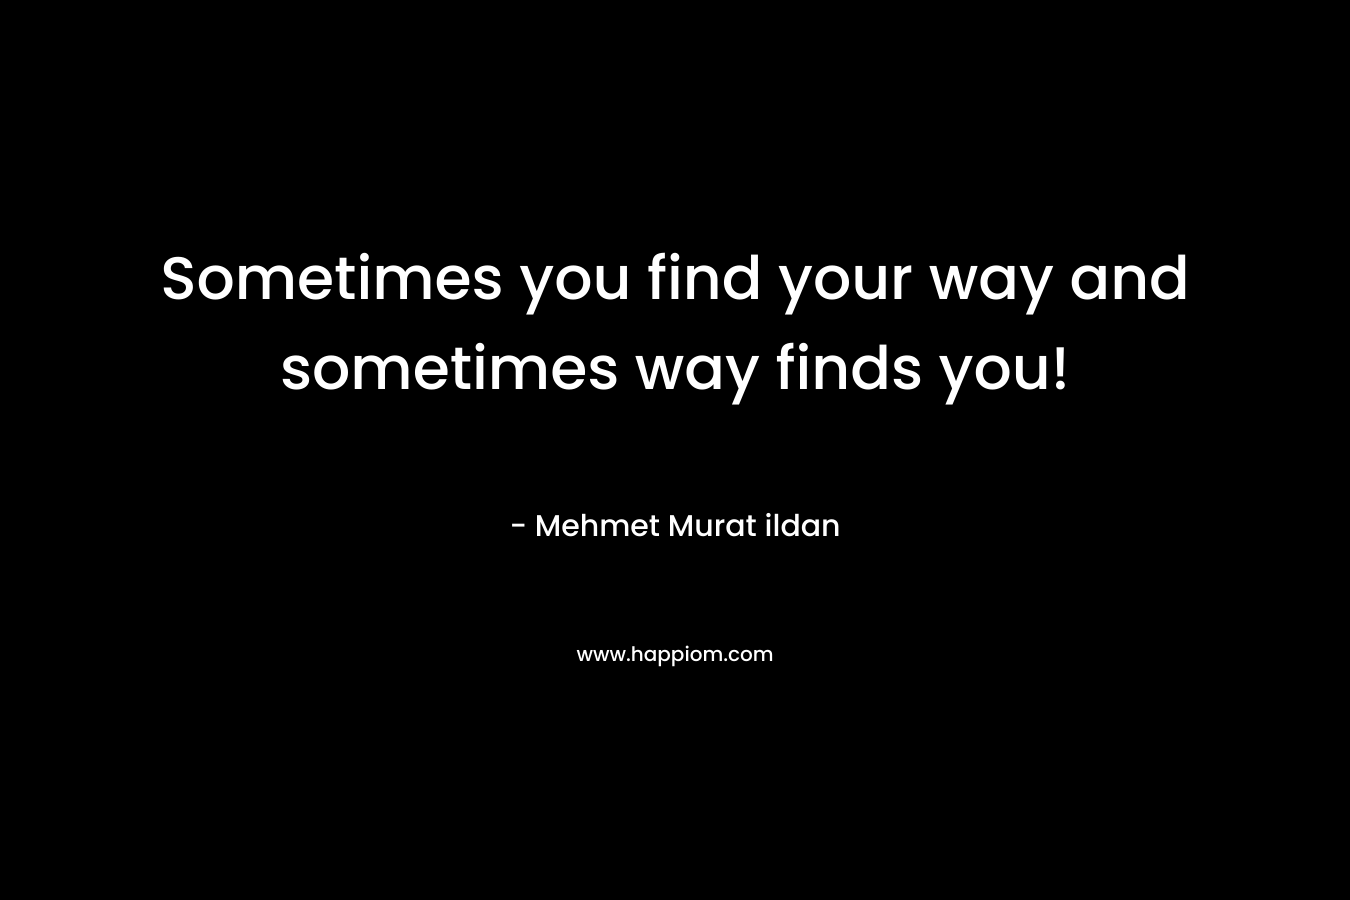 Sometimes you find your way and sometimes way finds you!